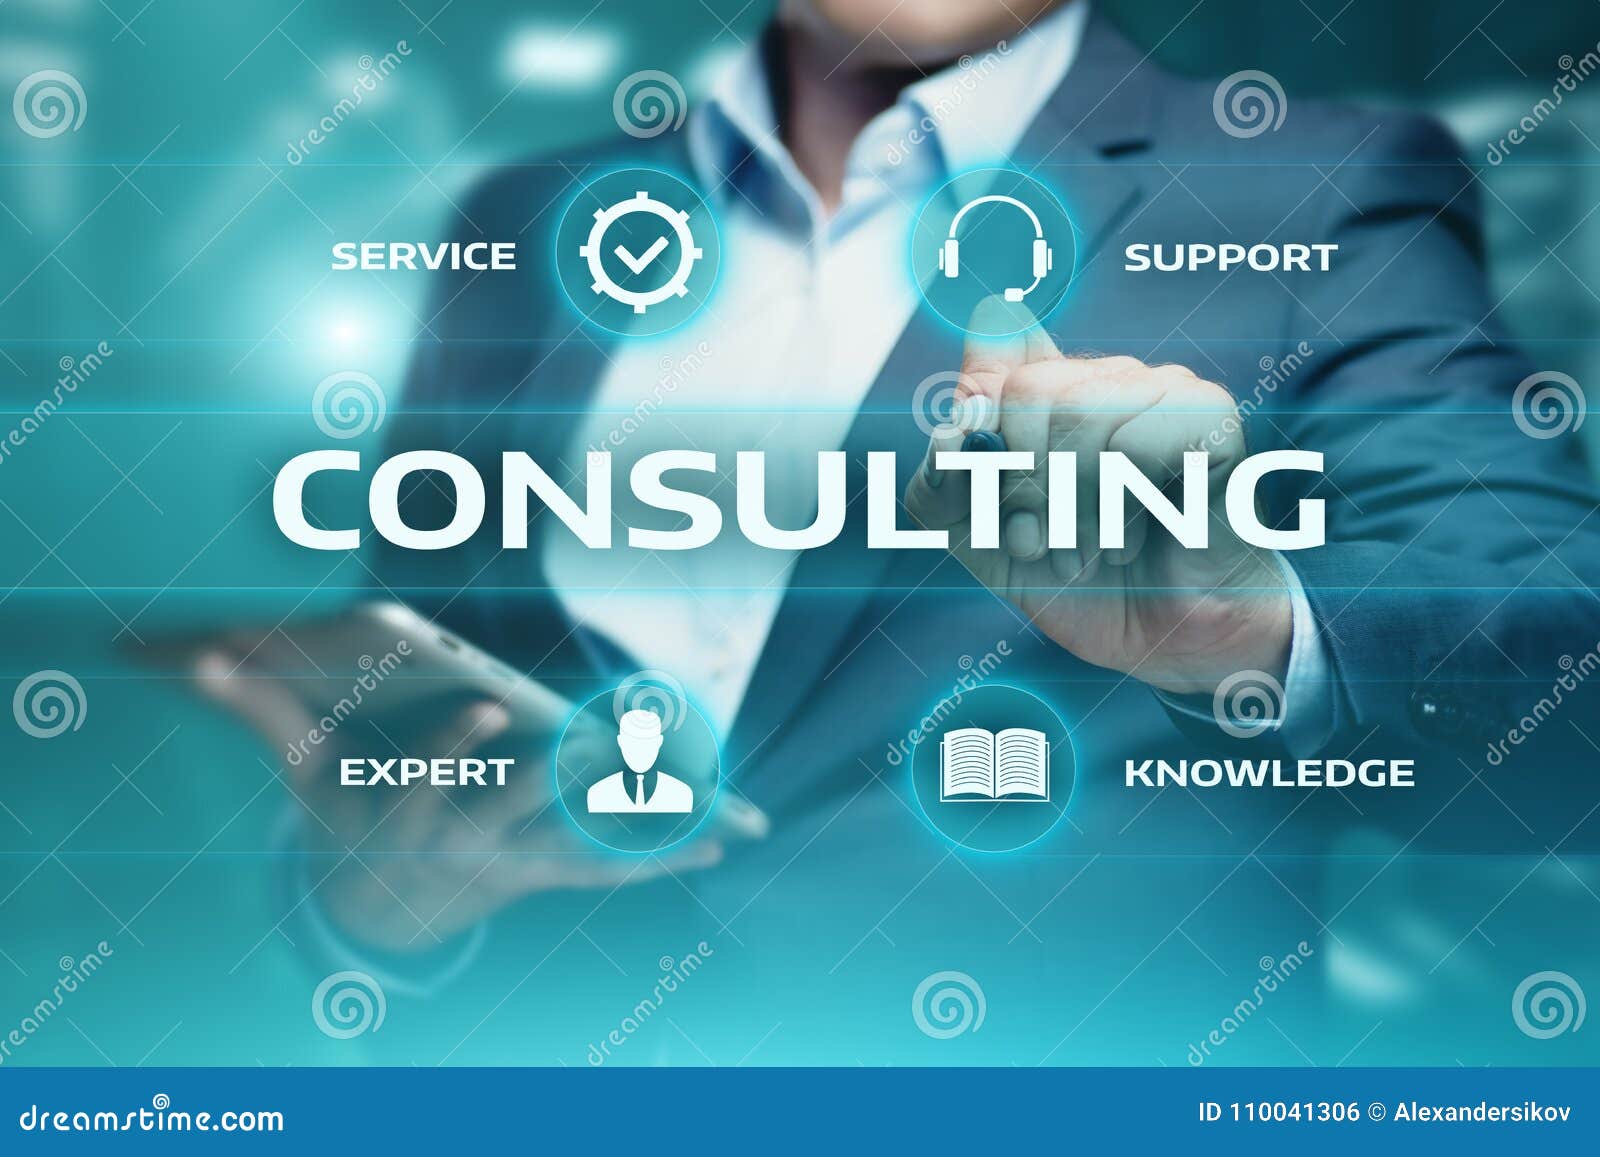 consulting expert advice support service business concept